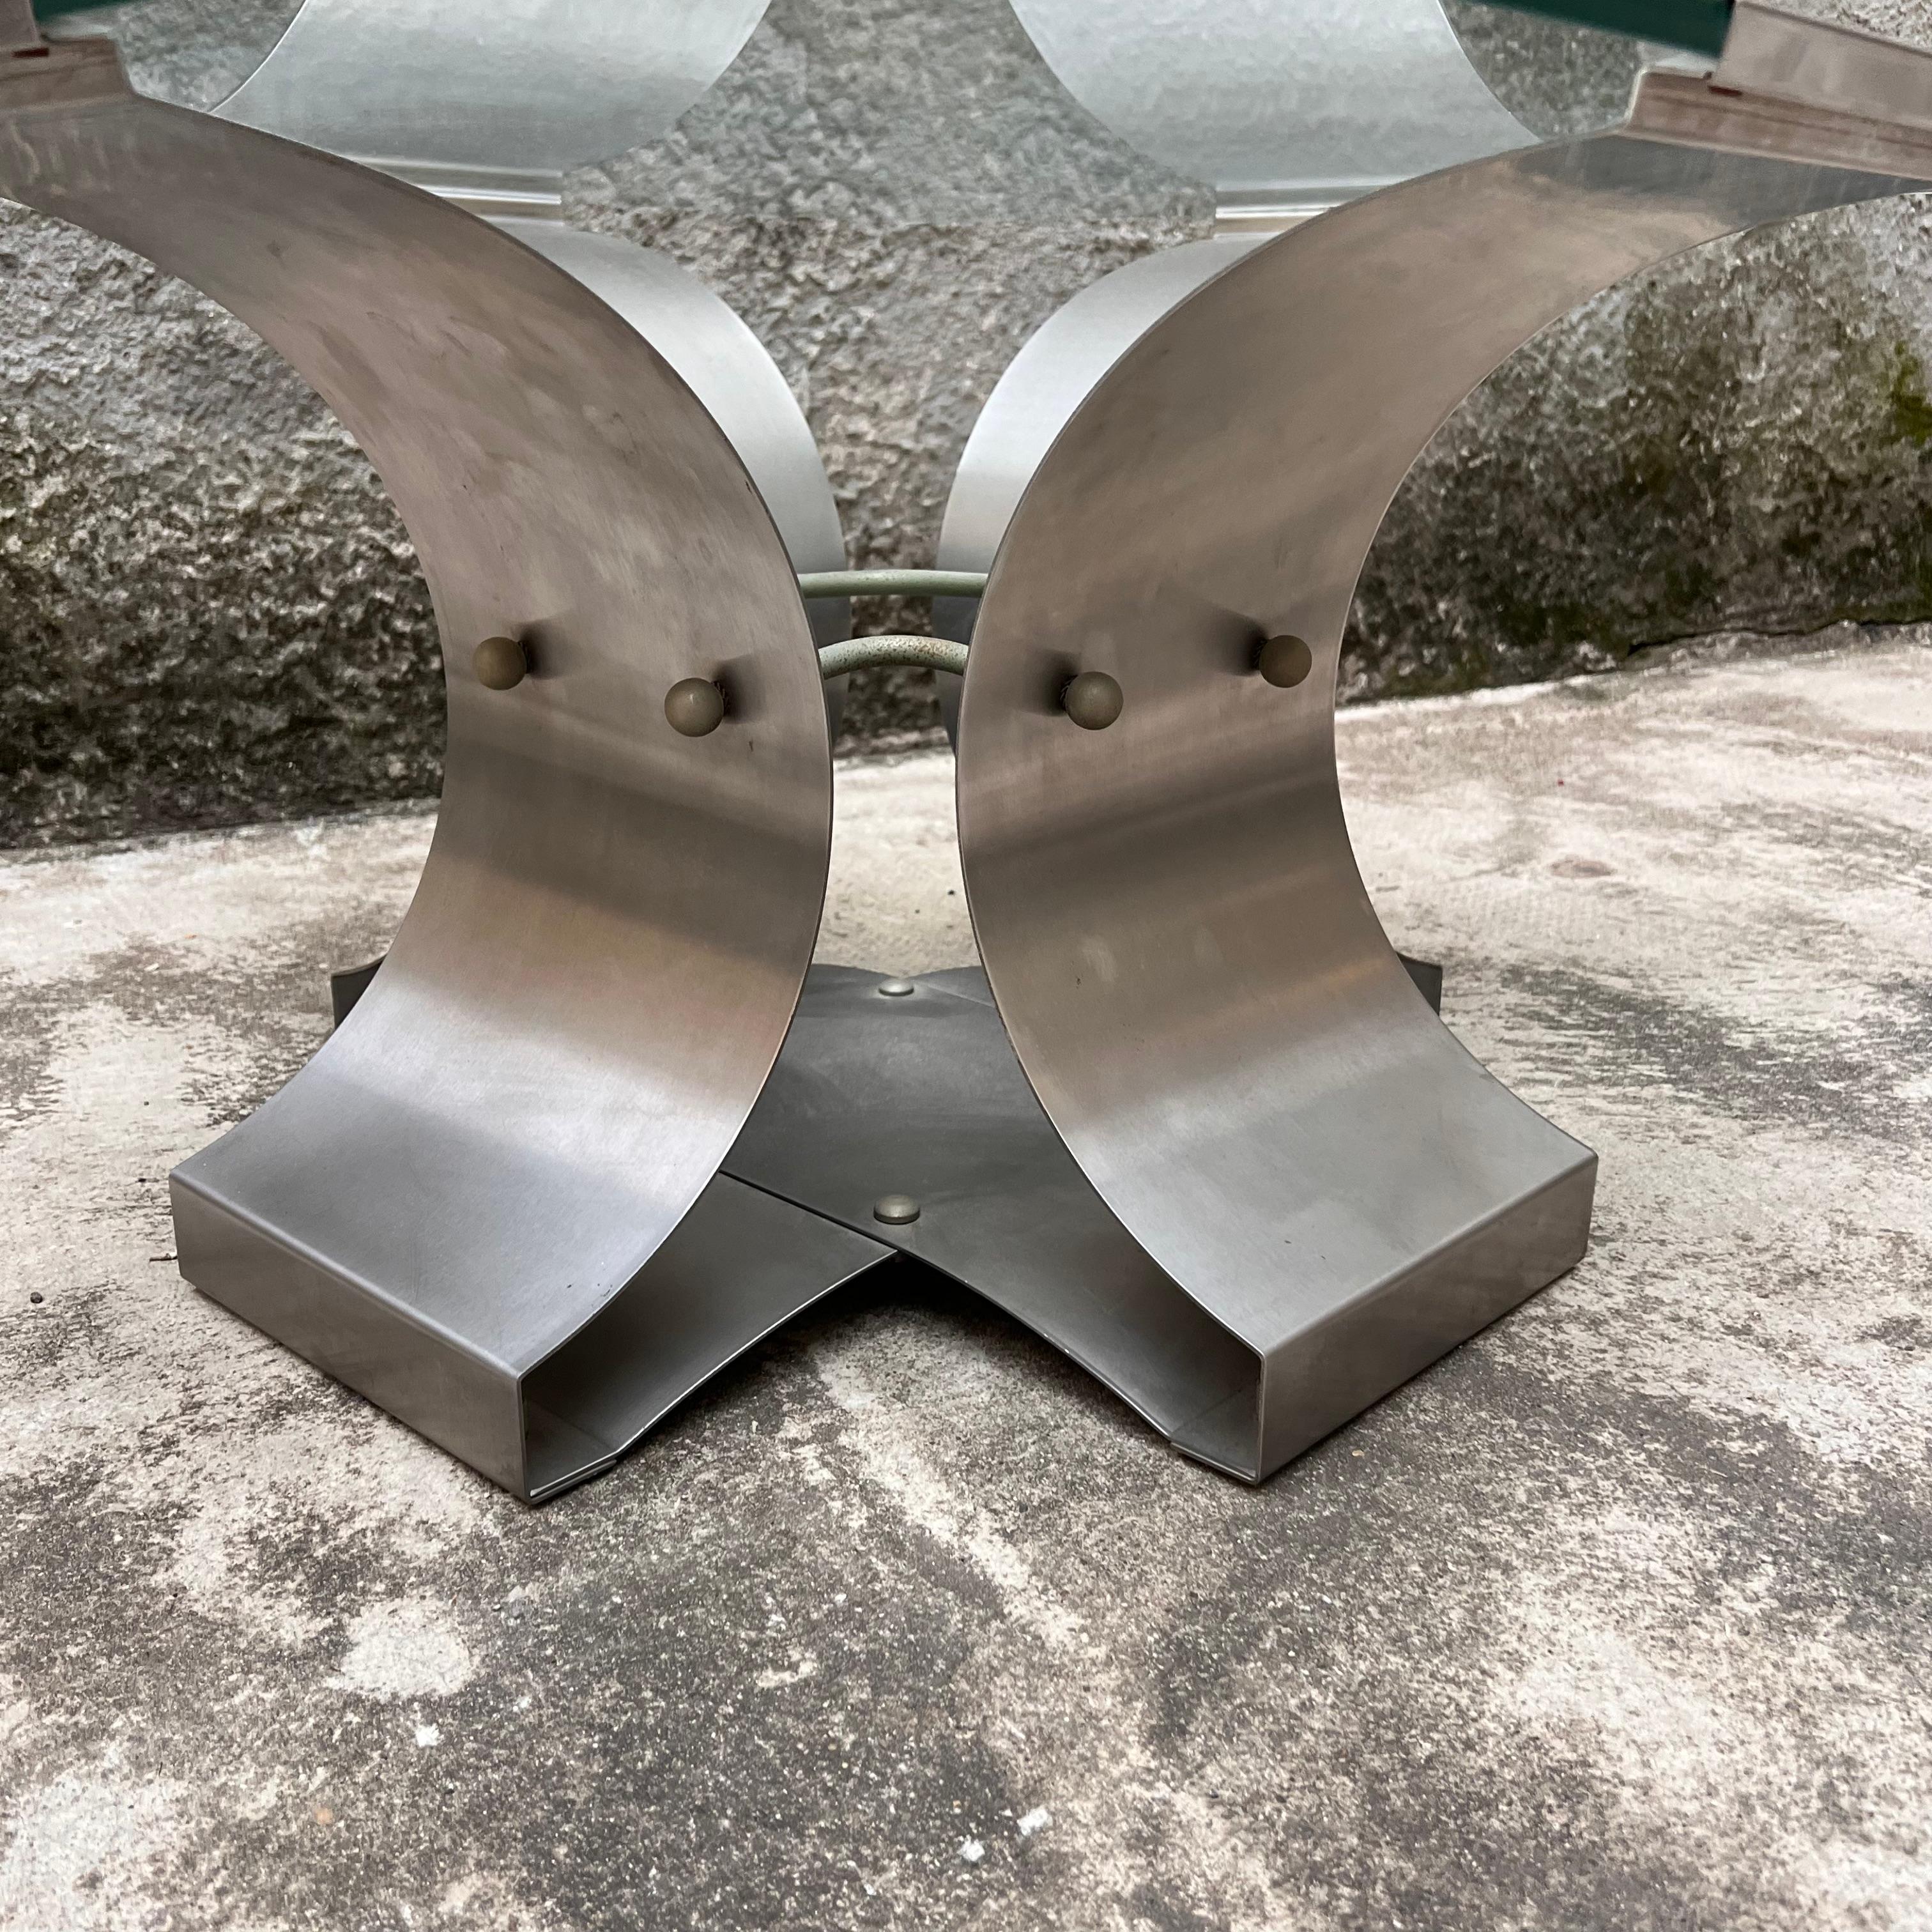 Steel coffee table by François Monnet for Kappa - Italy - 1970s For Sale 2